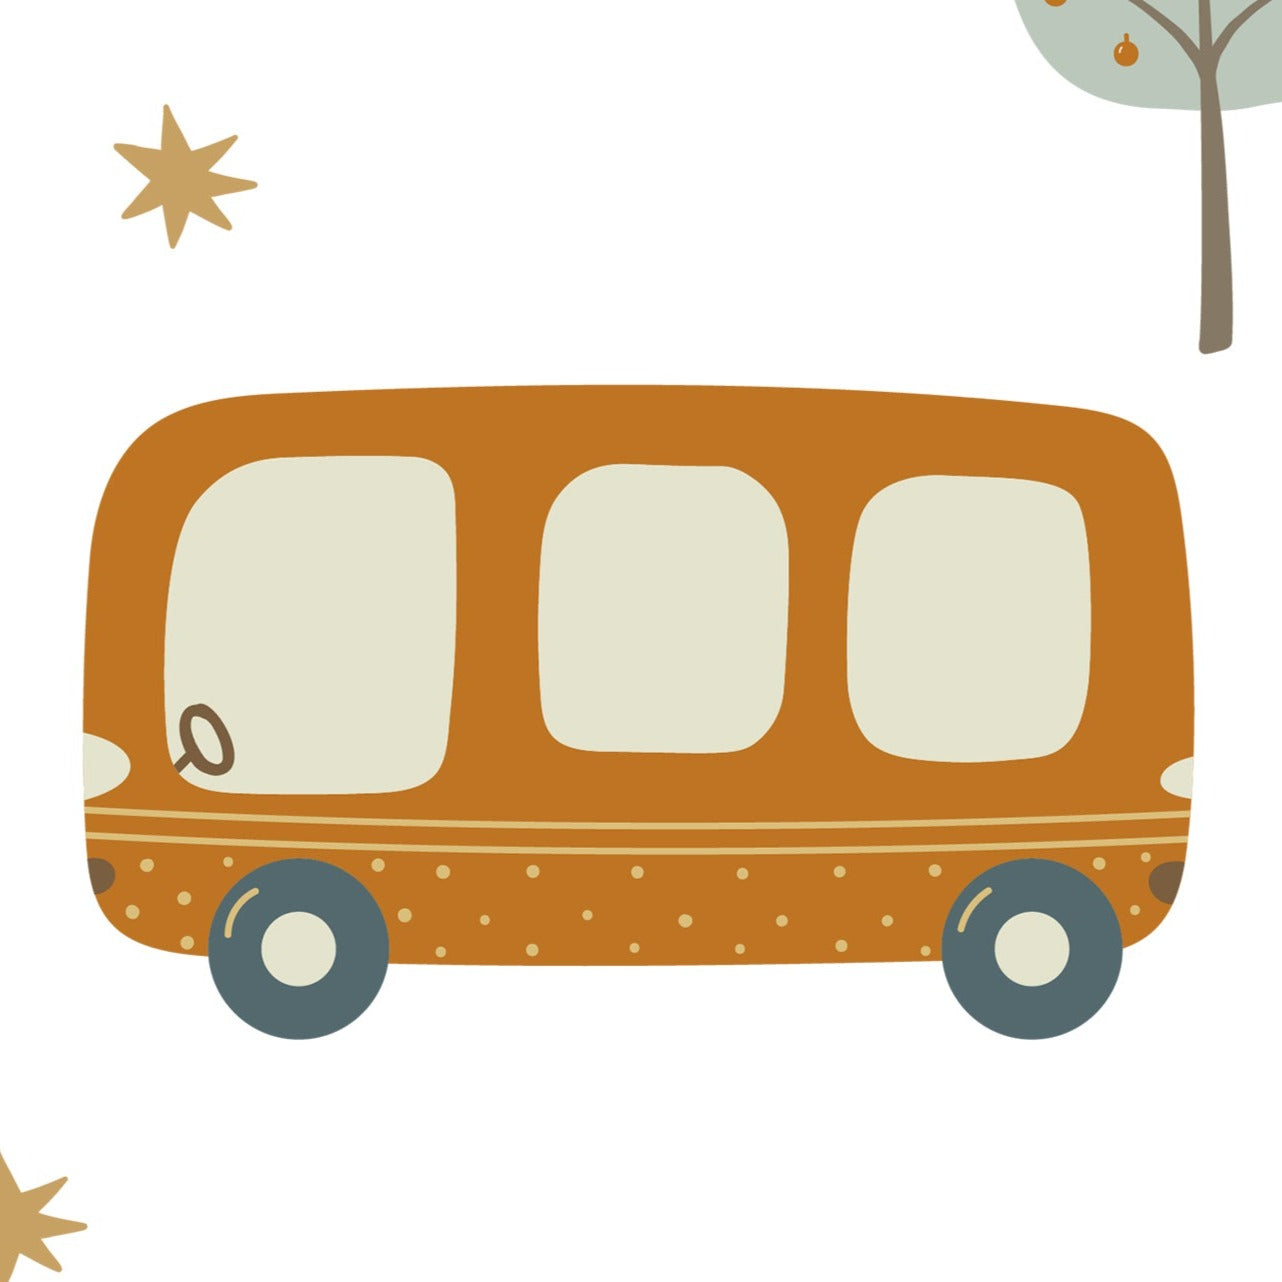 Close-up view of the School Bus Wallpaper featuring quaint orange school buses interspersed with stylized light blue trees and golden stars on a light background, creating a charming and playful pattern suitable for children's rooms